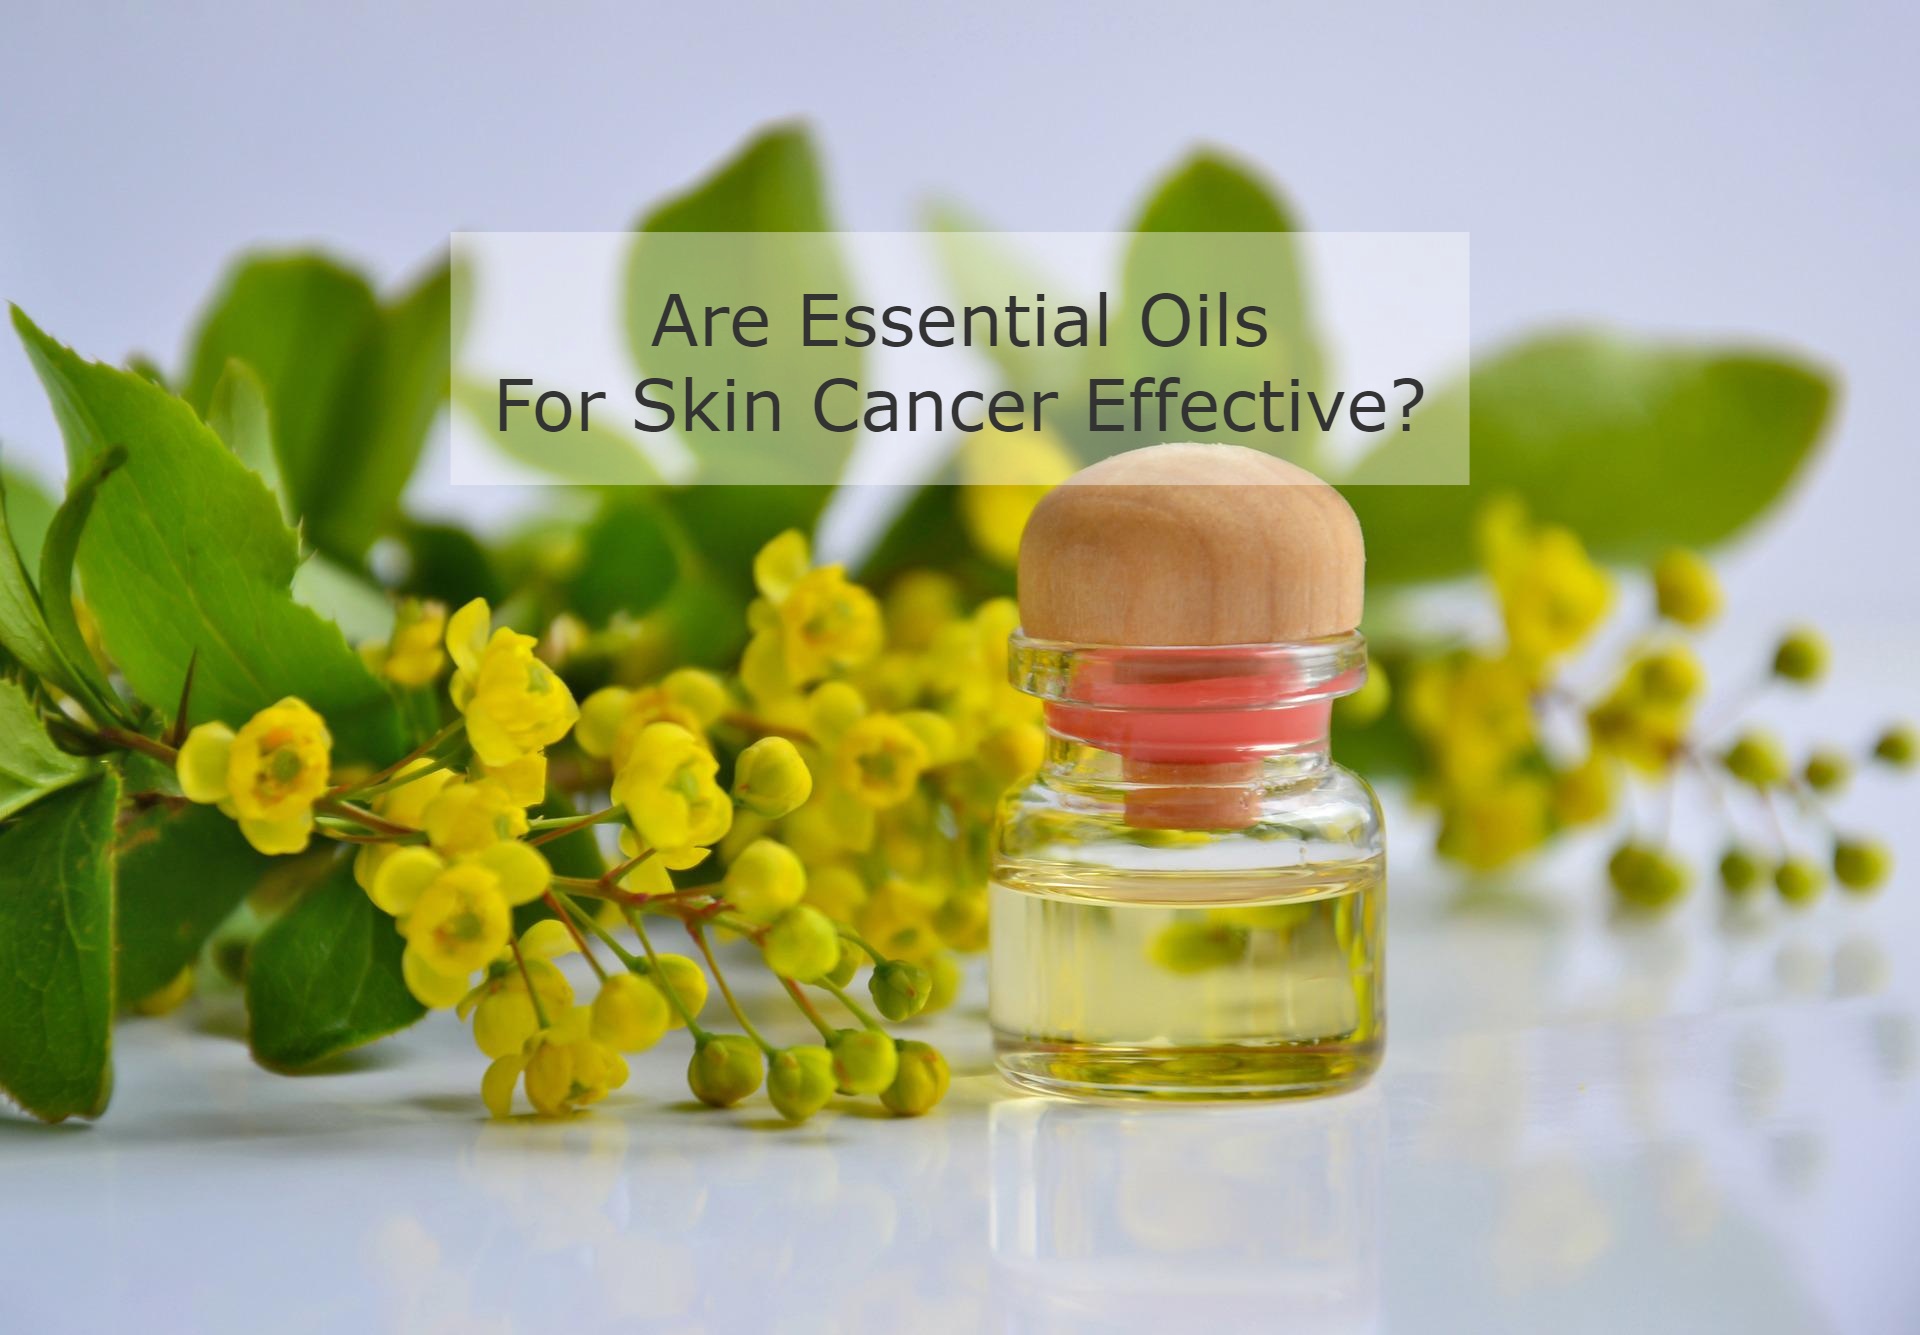 Are Essential Oils For Skin Cancer Effective?